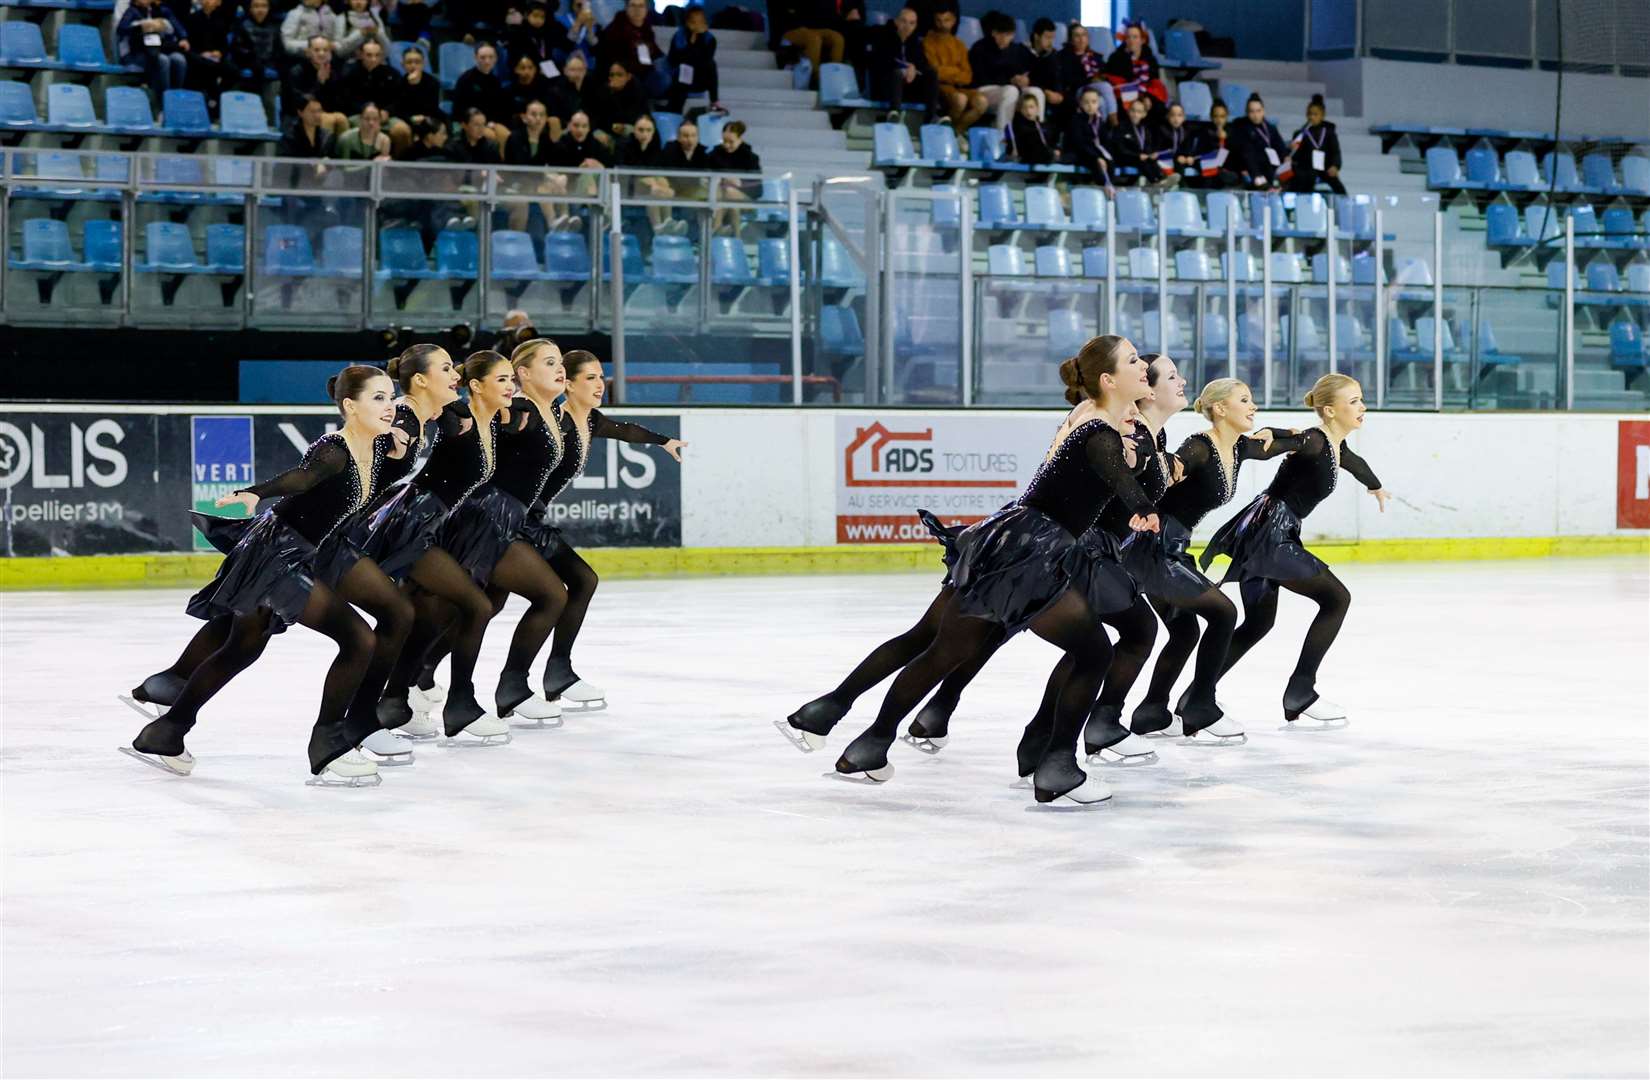 Northern Lights of Great Britain competes in the International Mixed Age Trophy at Vegapolis Ice Parc on April 20, 2024 in Montpellier, France. Picture: Philipp Dolder.